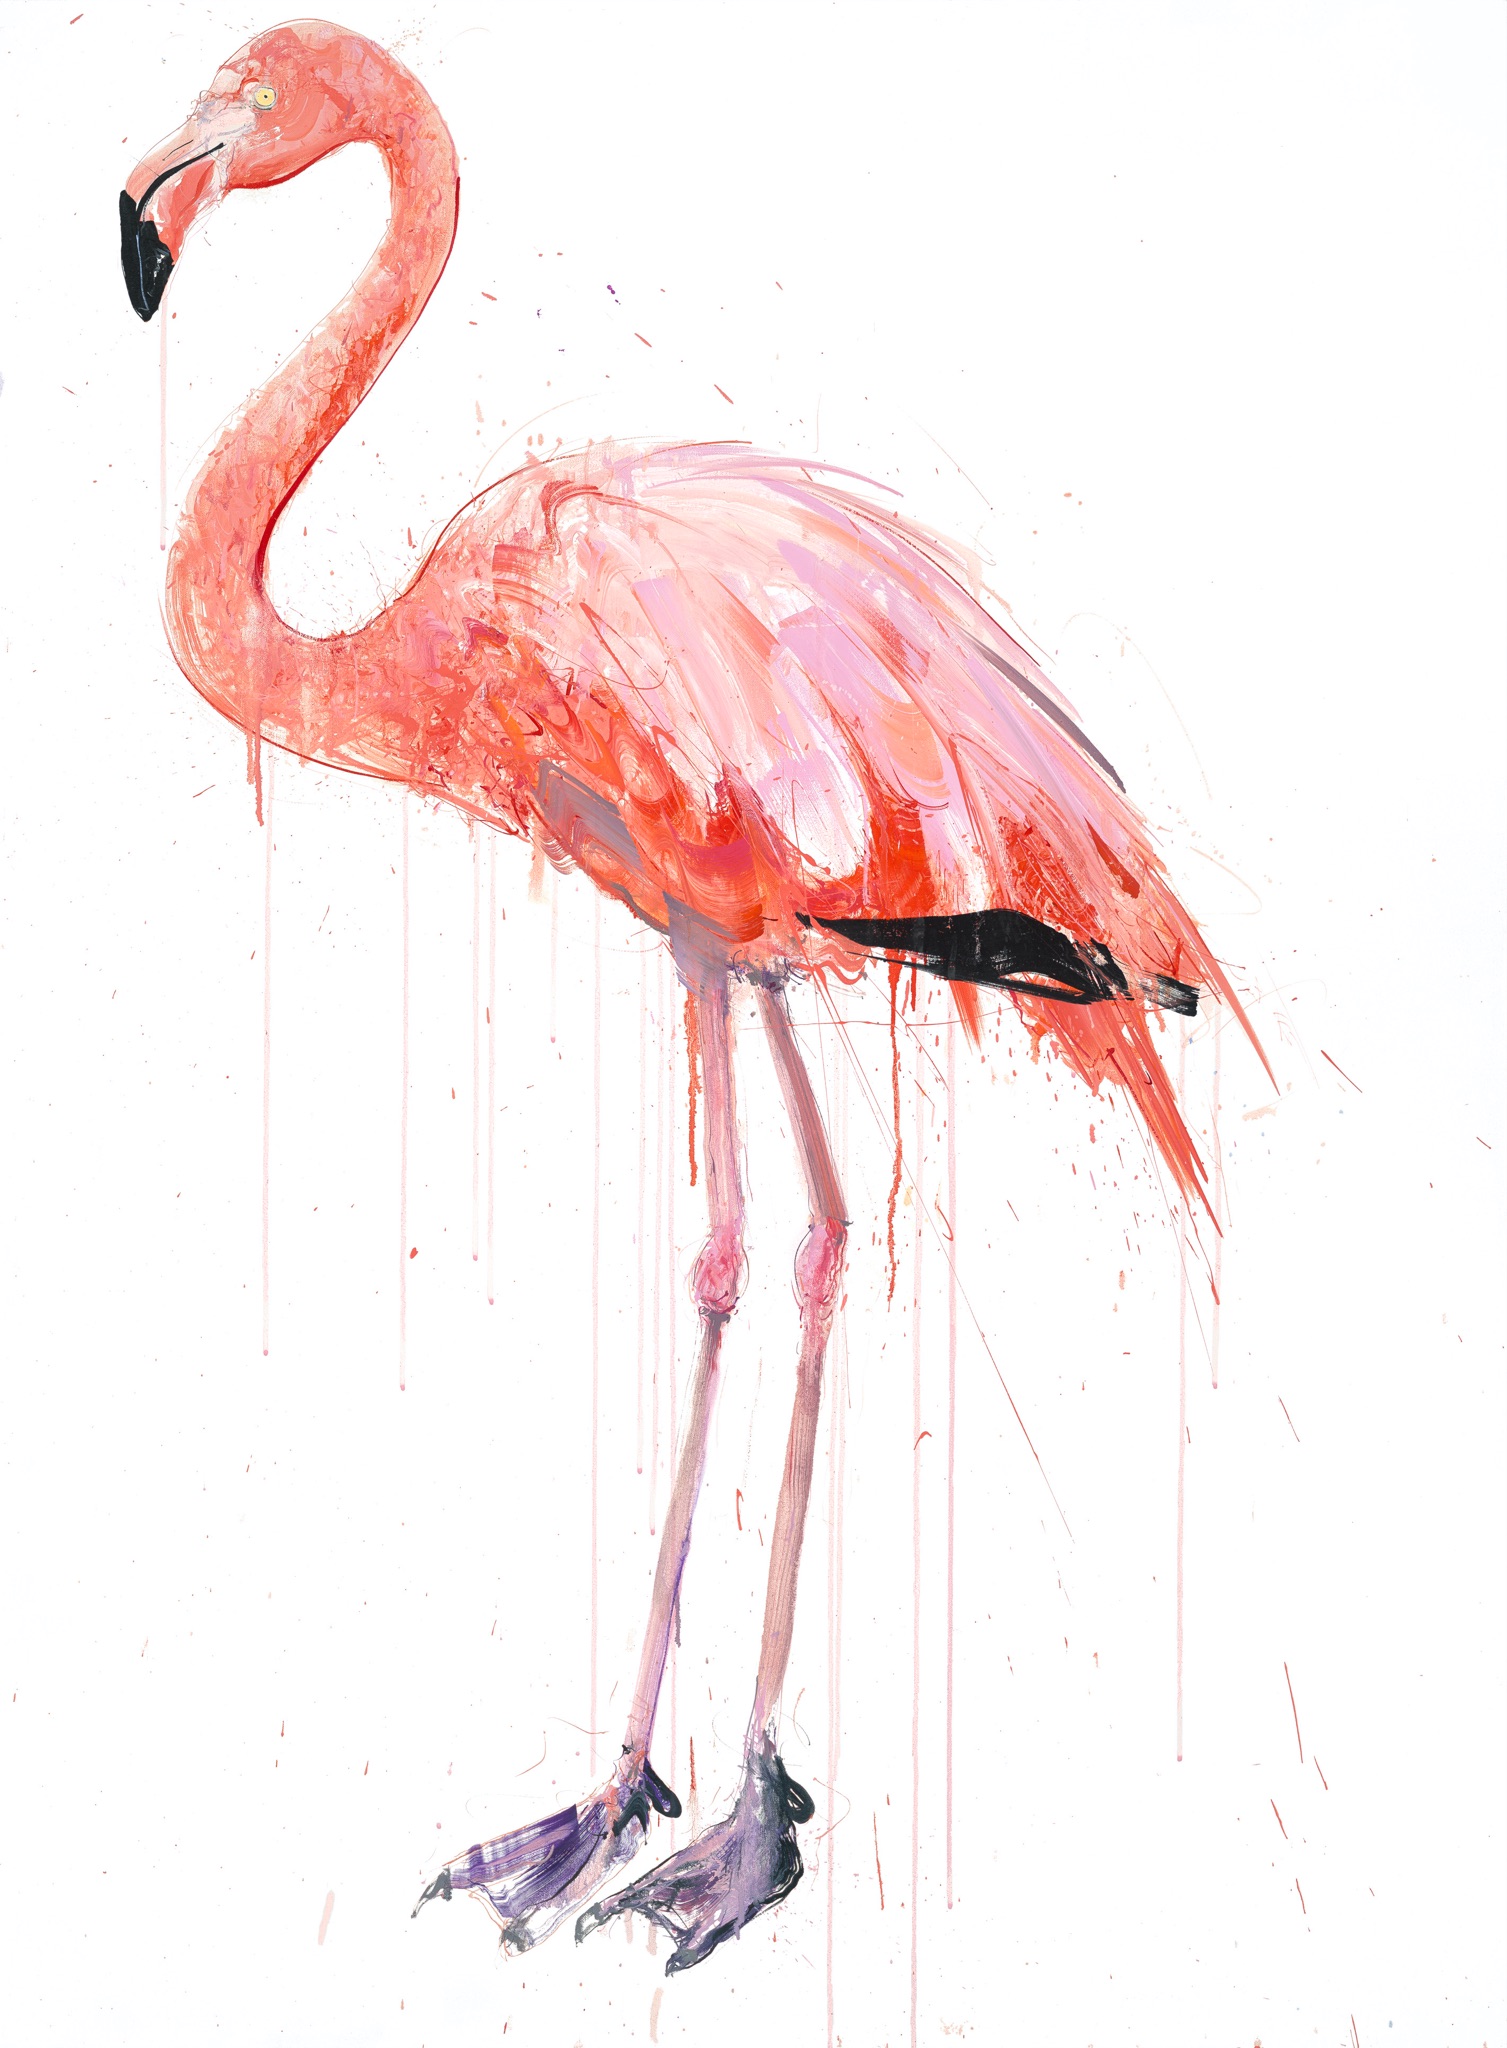 Dave White's "Flamingo Facing Left" (2019) is on view now at The White Room Gallery..